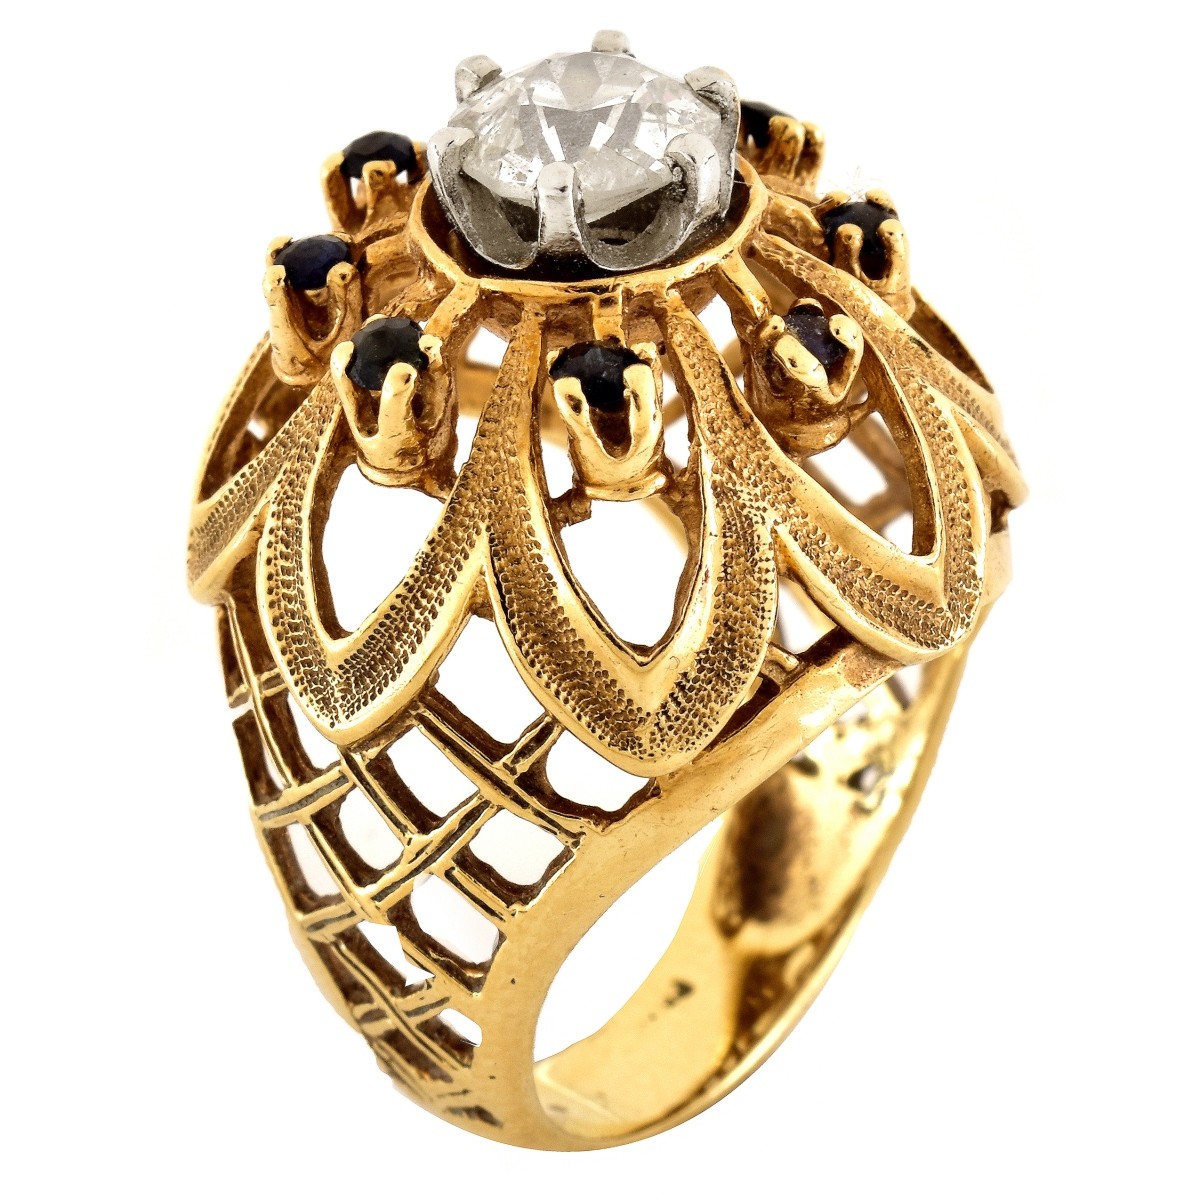 1.0ct Diamond and 14K Gold Ring